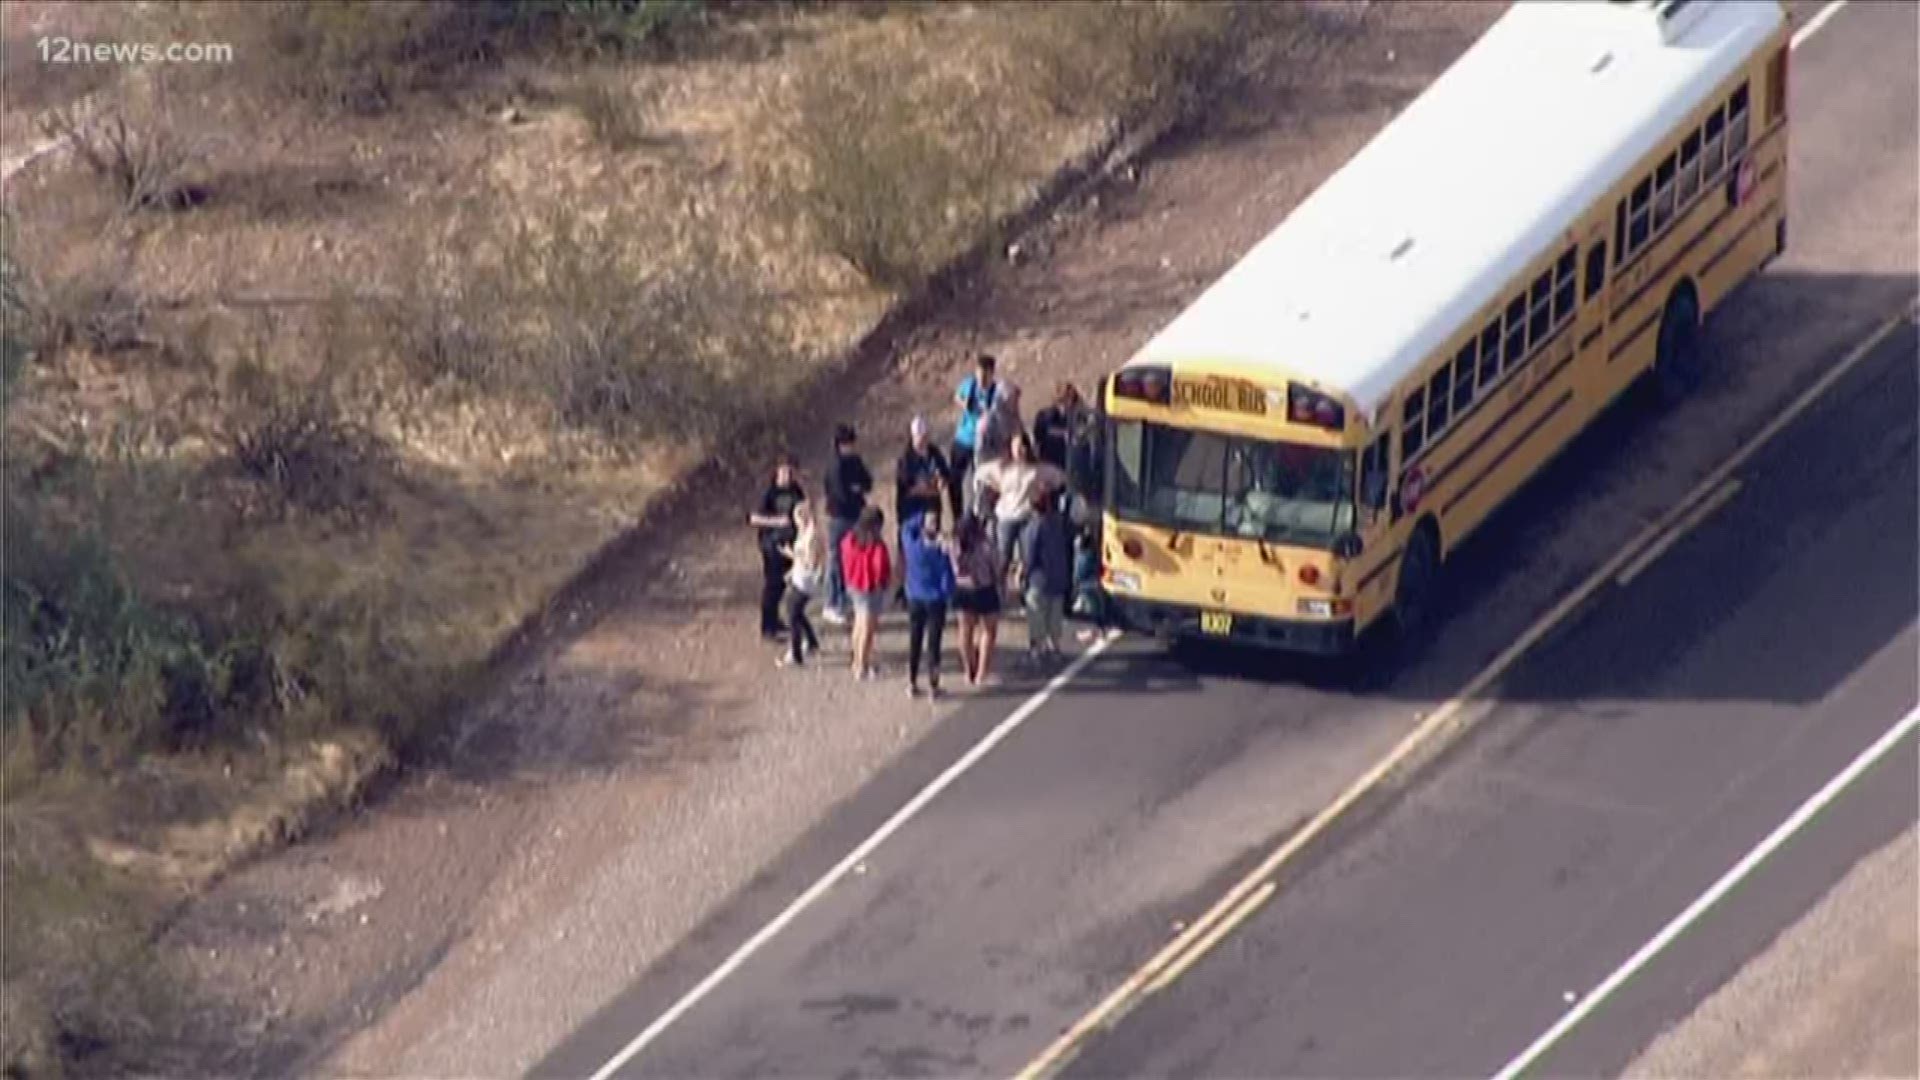 19 students on a school bus in Wittman were stranded between two flooded washes. Firefighter eventually rescued the students and cleared the road for other cars.